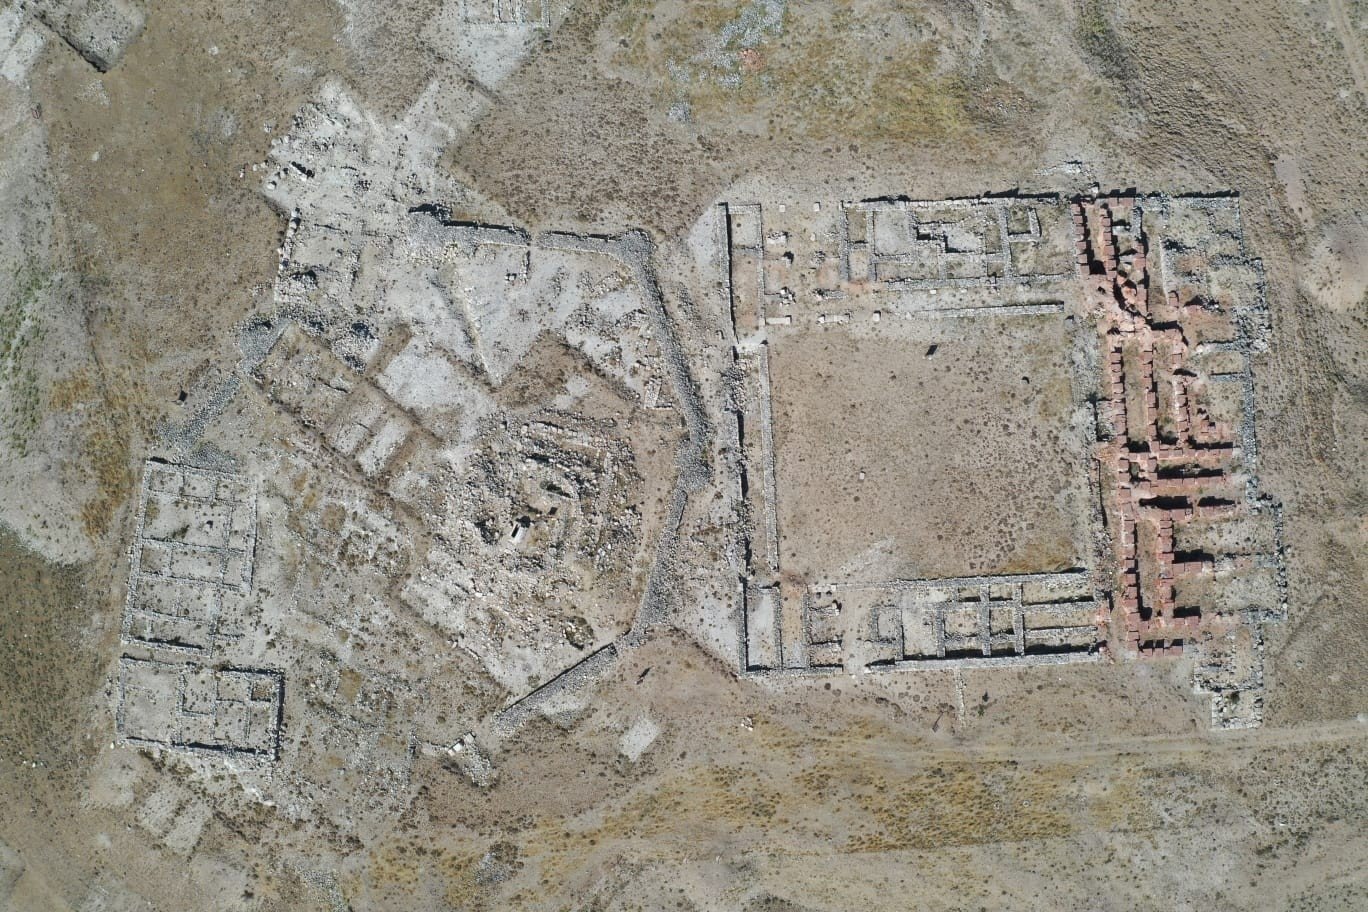 An aerial view from the archaeological site of Kuşaklı, Sivas, central Turkey, Aug. 6, 2021. (IHA Photo)